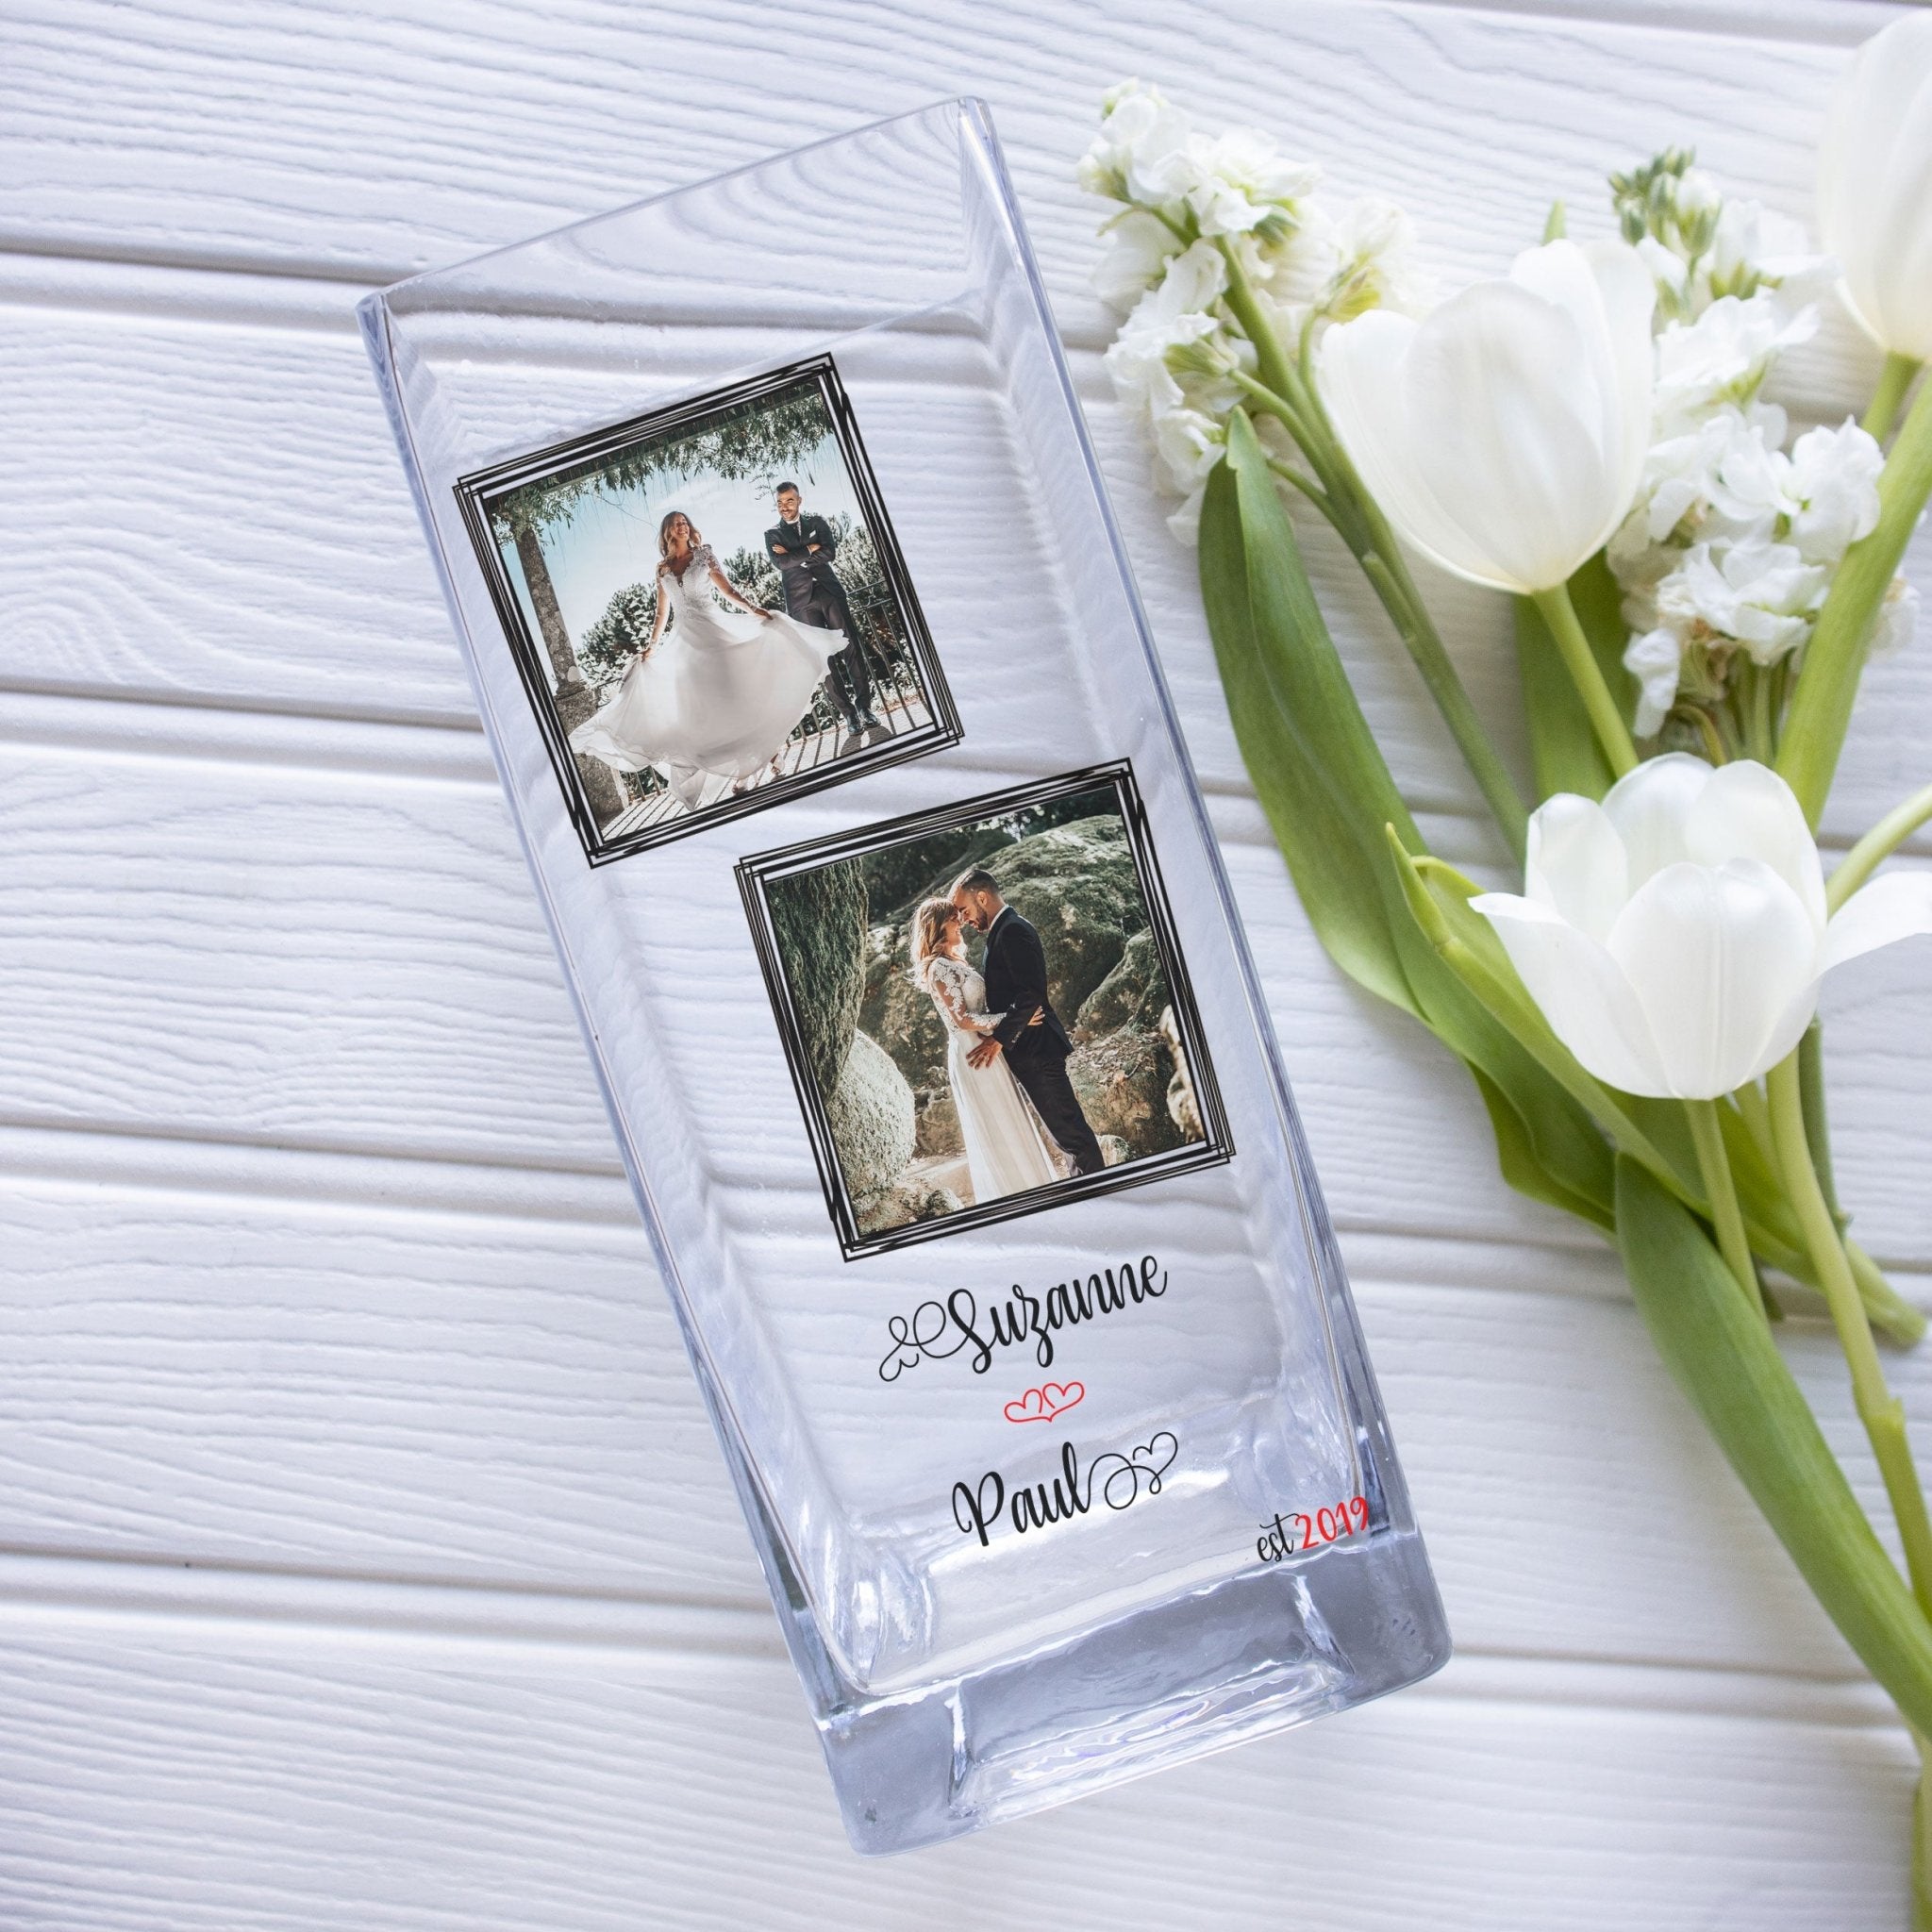 Boyfriend Custom Photo Glass Vase | Long Distance Relationship Gift Ideas | Personalised Flower Stand w/ Picture Present, Crystal Home Decor Vase - Unique Prints